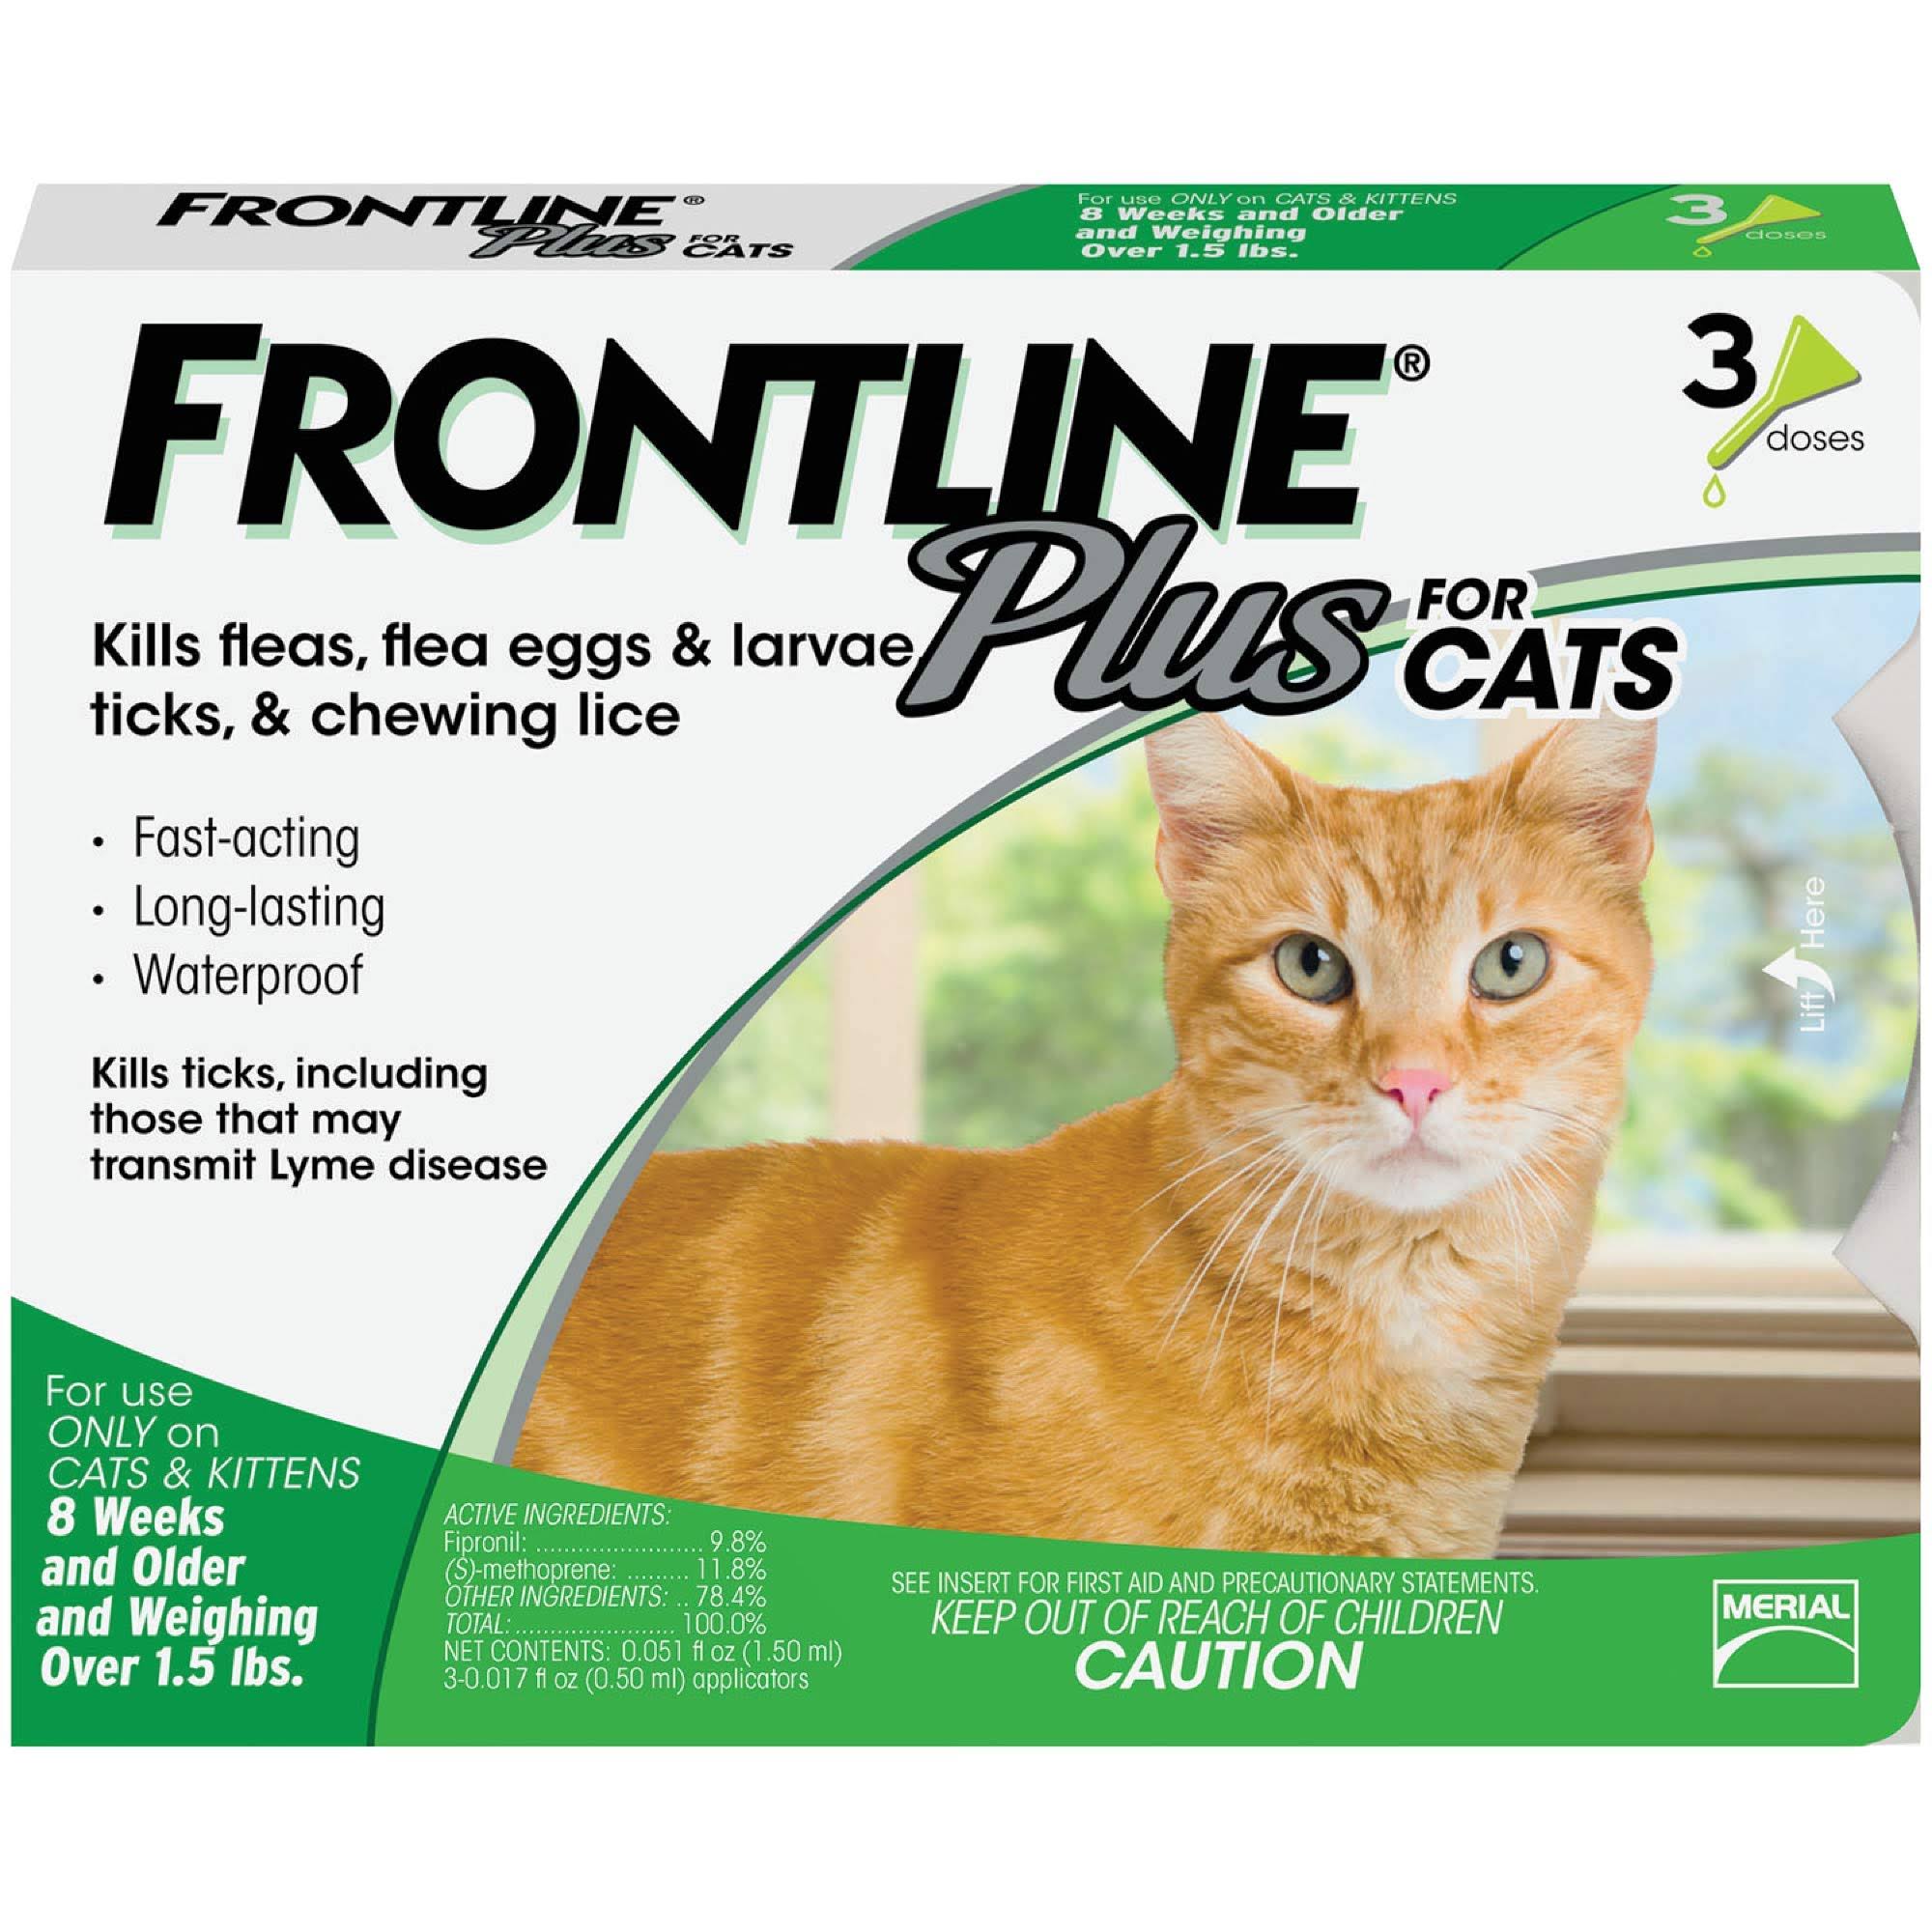 Frontline Plus For Cats - 3 Doses